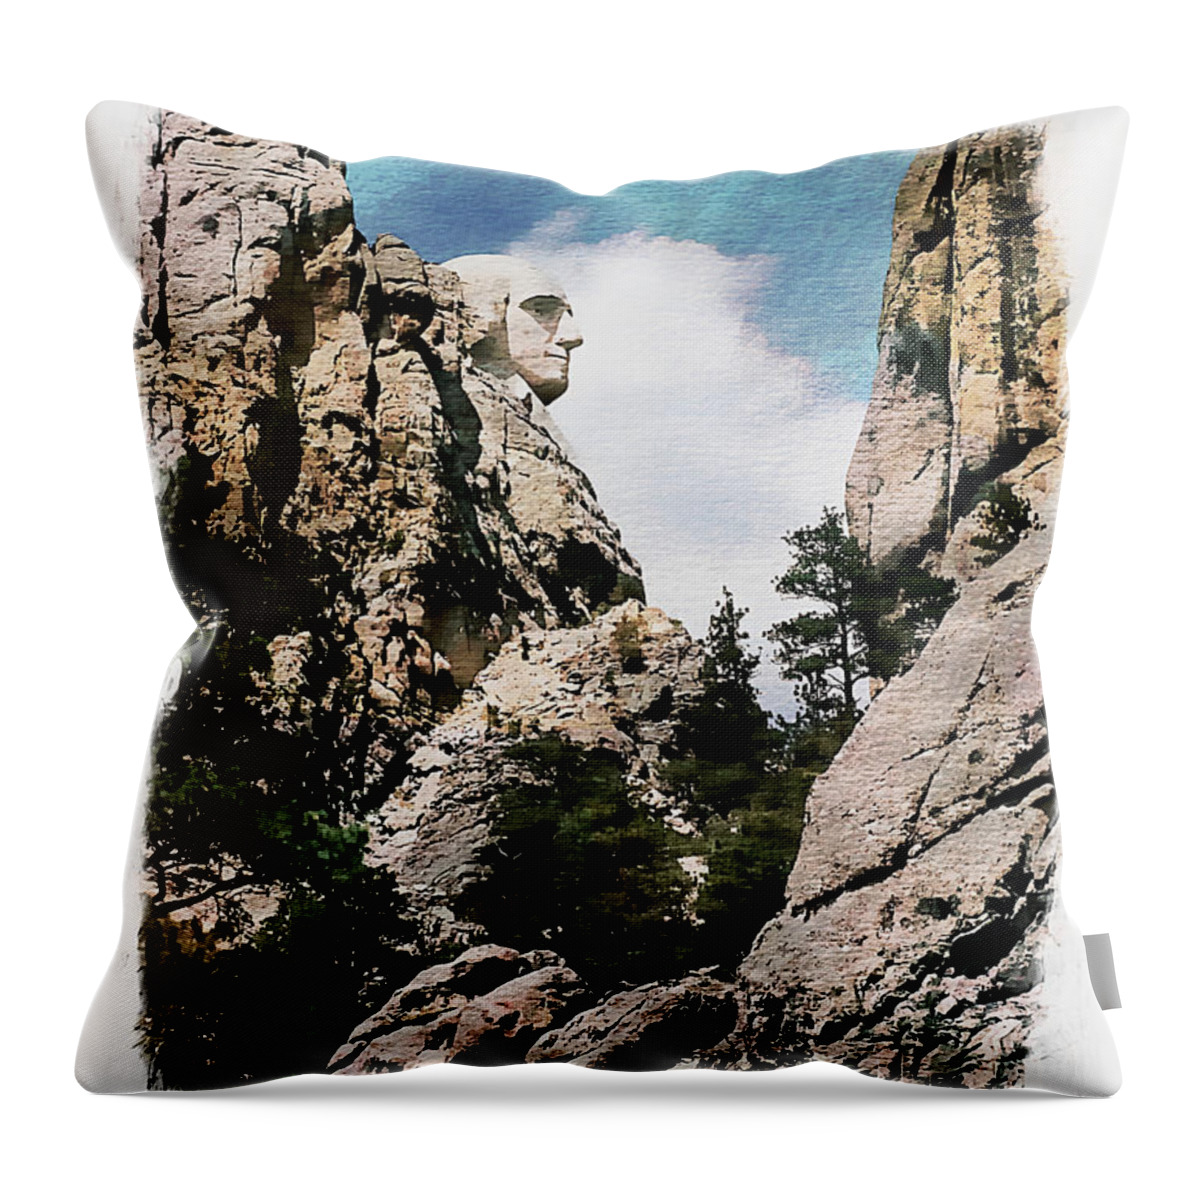 United States Throw Pillow featuring the photograph George Washington Profile - Mount Rushmore by Joseph Hendrix